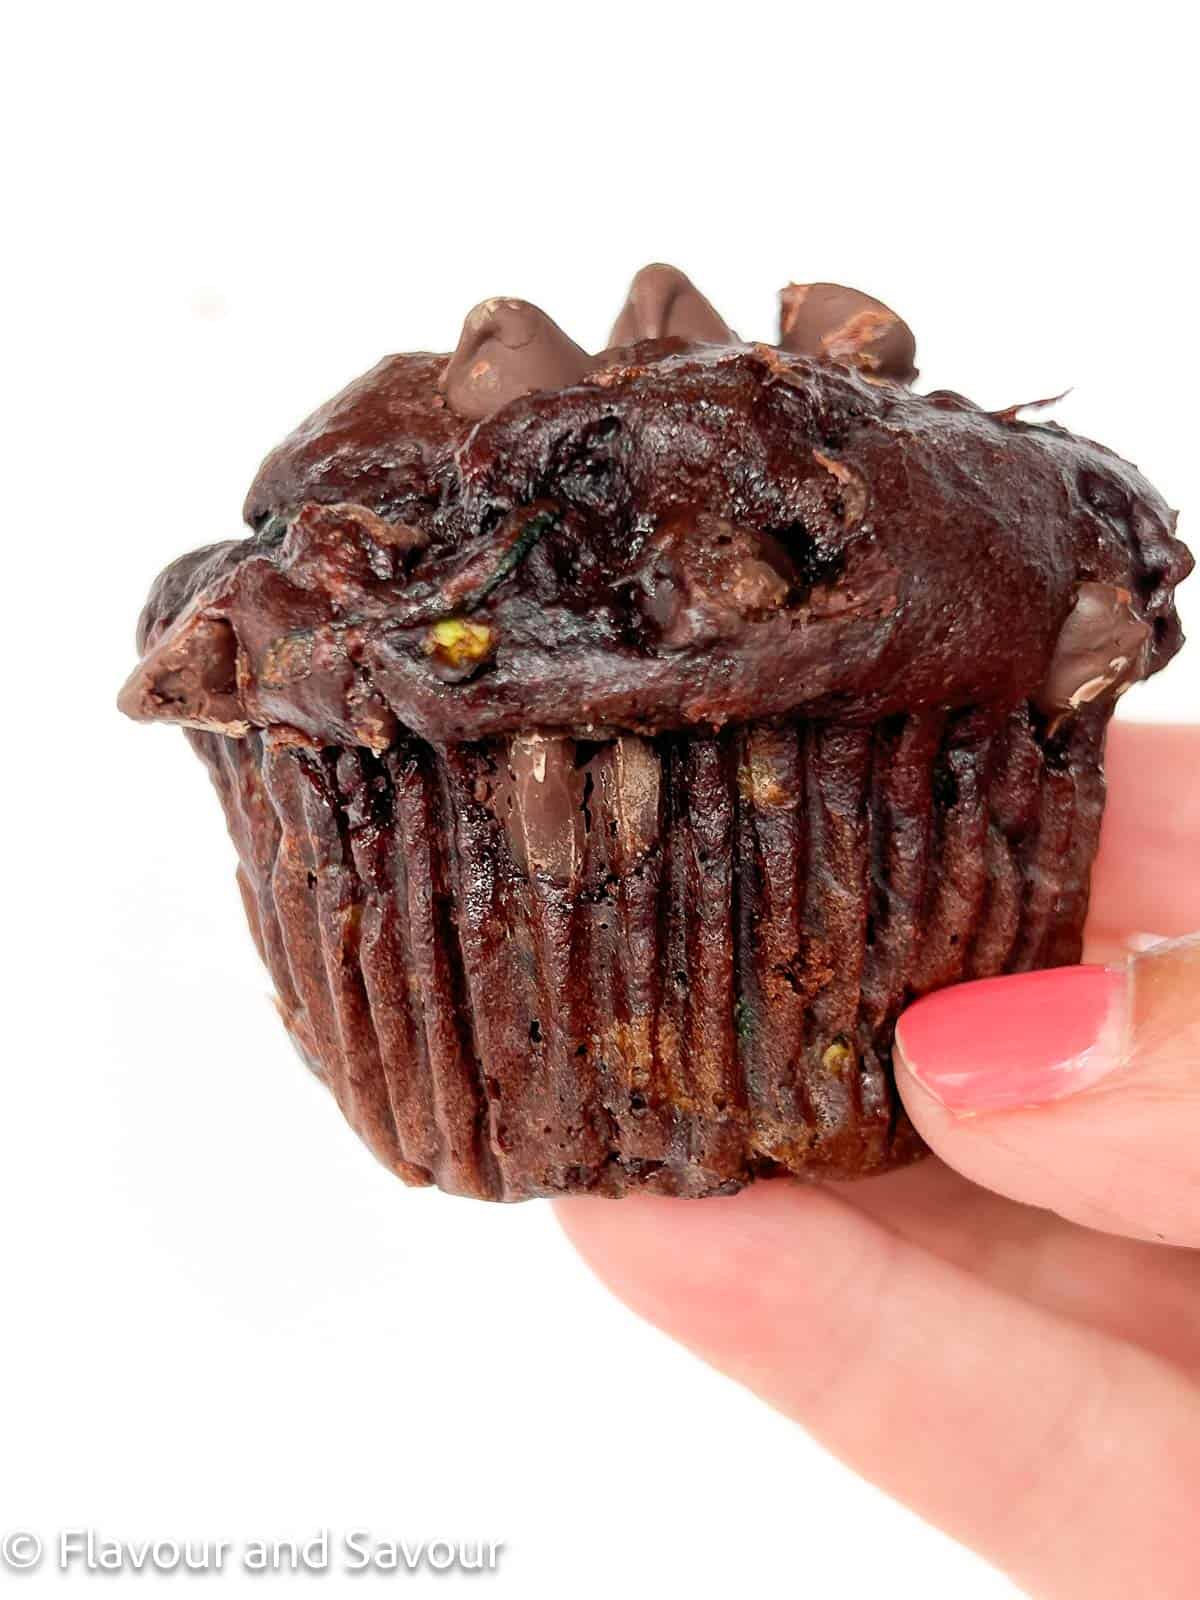 A hand holding a single double chocolate zucchini muffin.